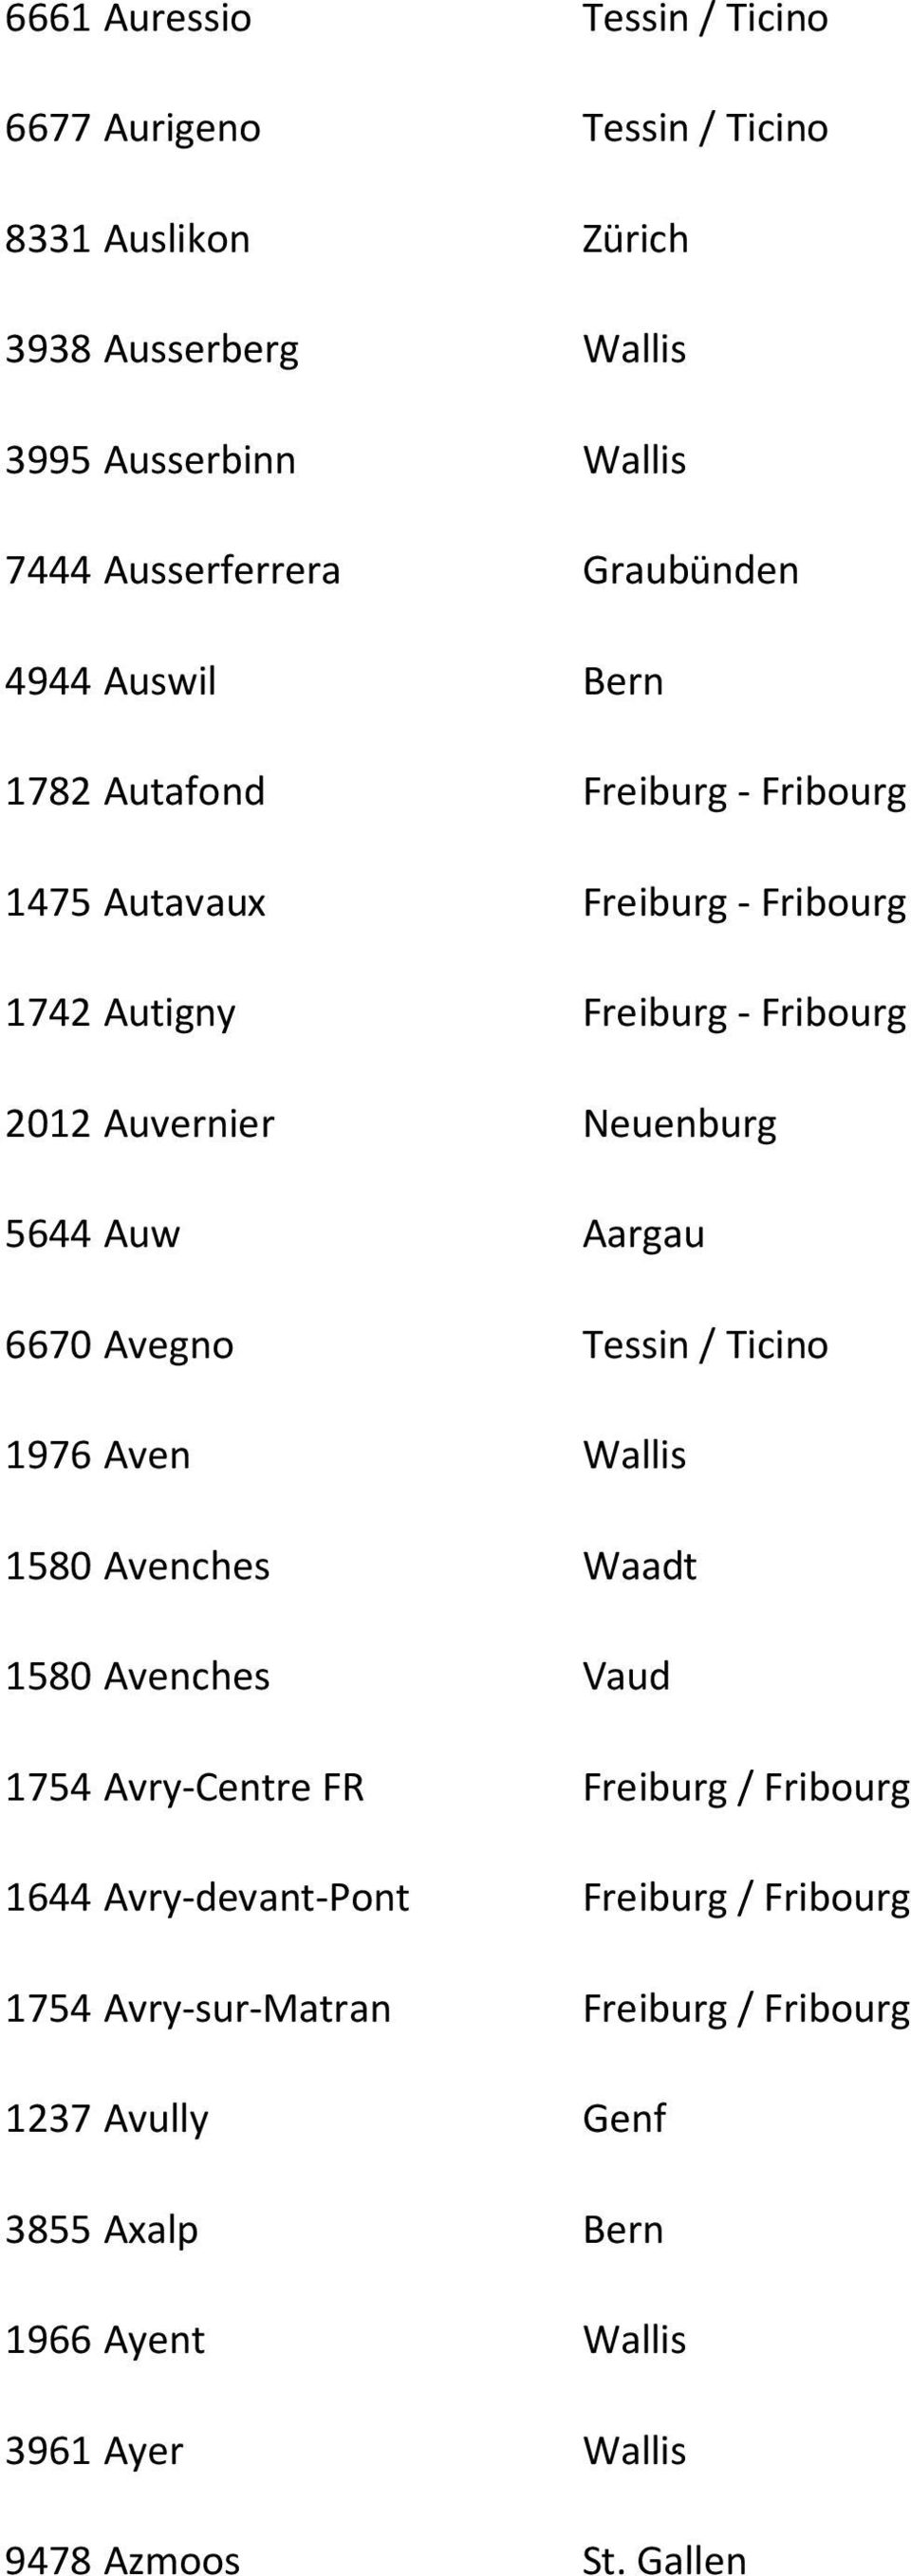 5644 Auw Aargau 6670 Avegno Tessin / Ticino 1976 Aven Wallis 1580 Avenches Waadt 1580 Avenches Vaud 1754 Avry-Centre FR Freiburg / Fribourg 1644